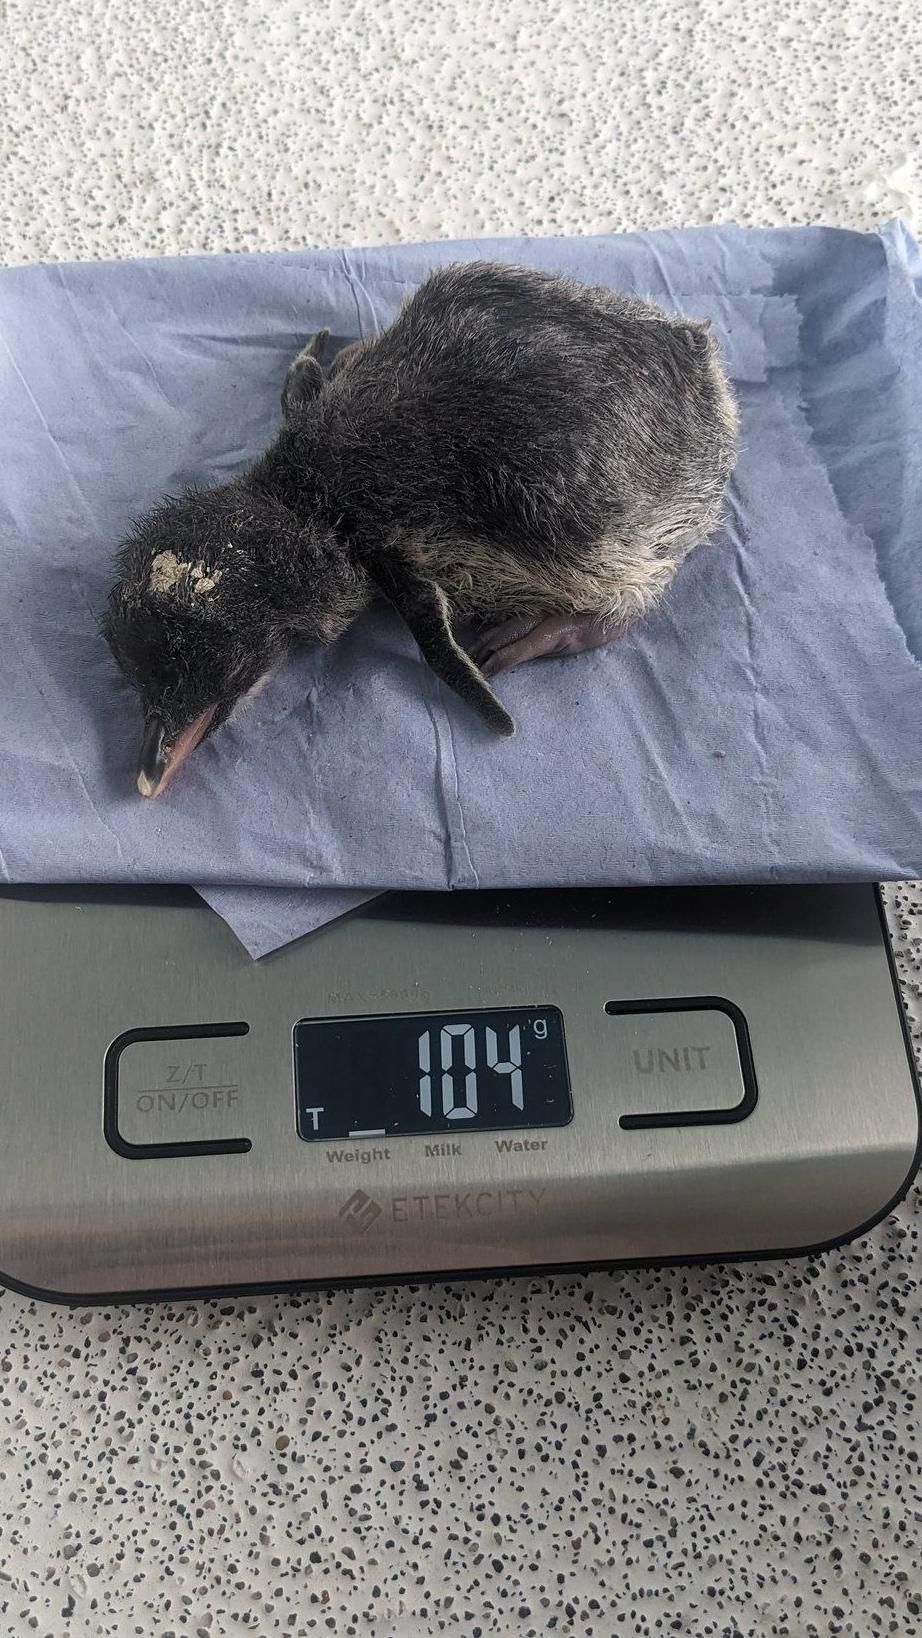 A newly hatched penguin chick on a pair of weighing scales